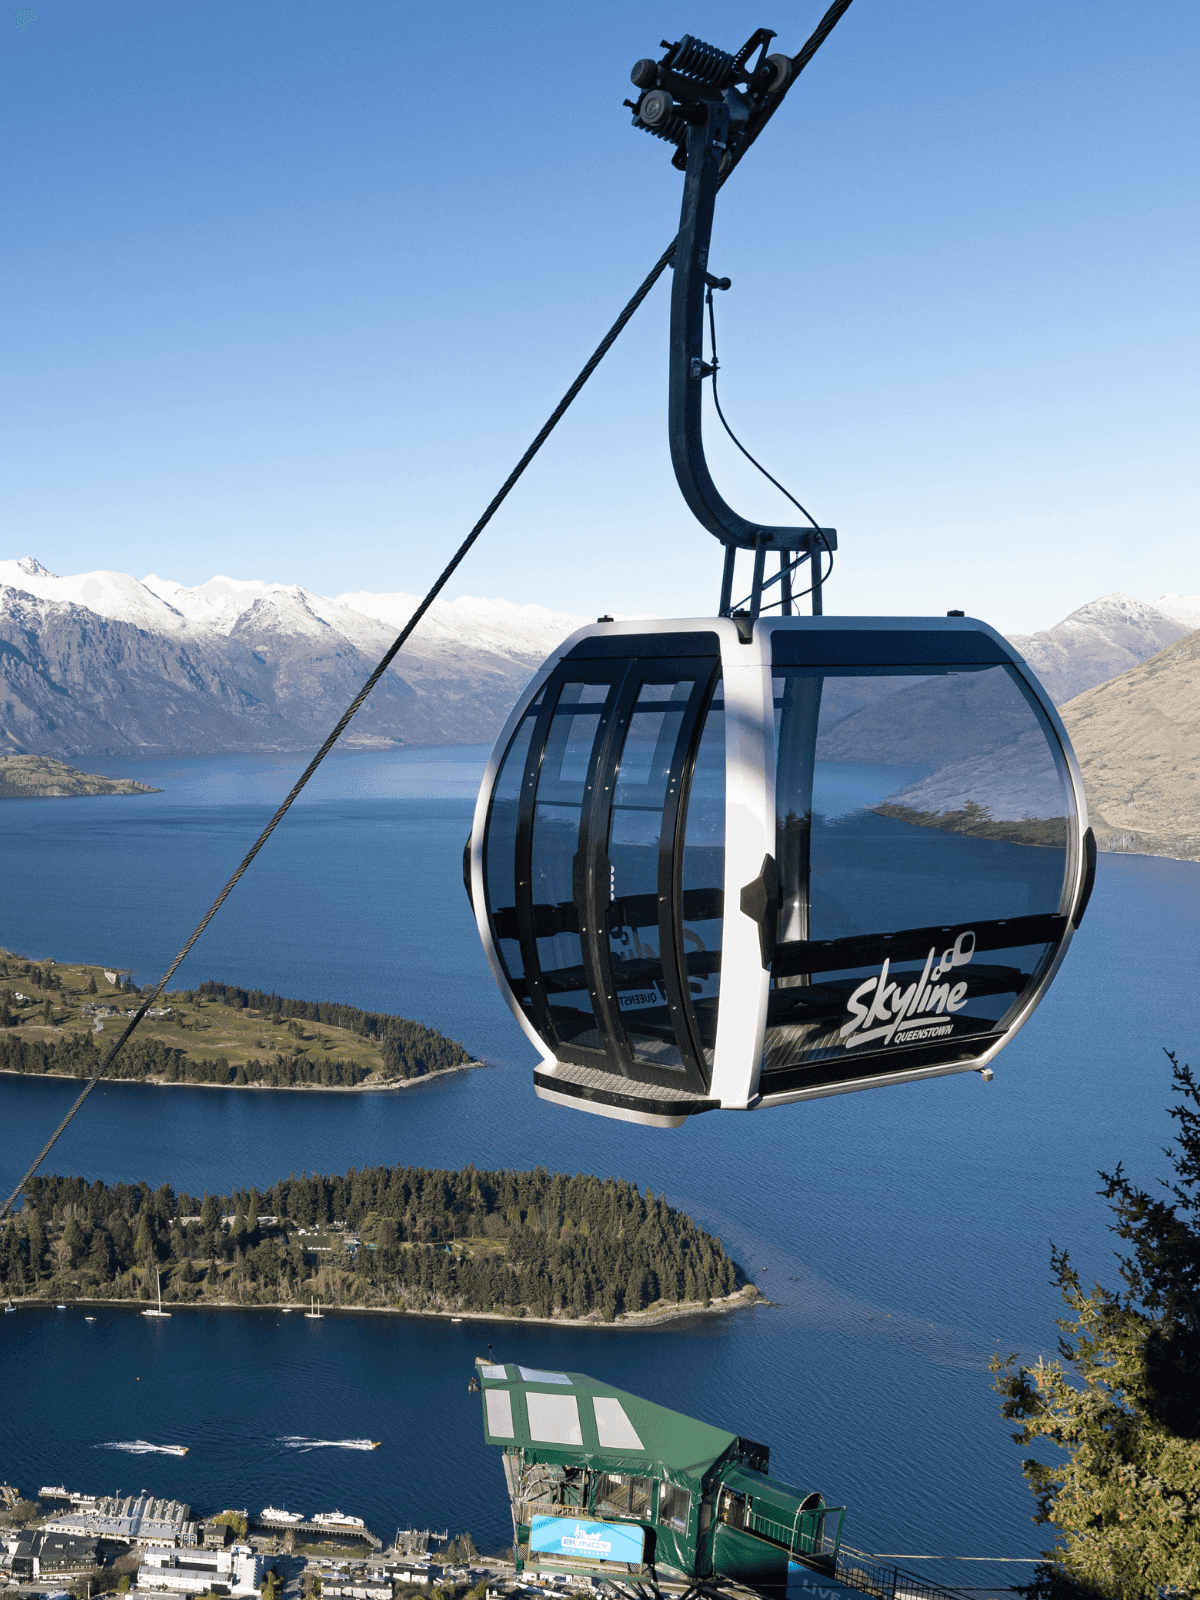 Gondola image on a clear day